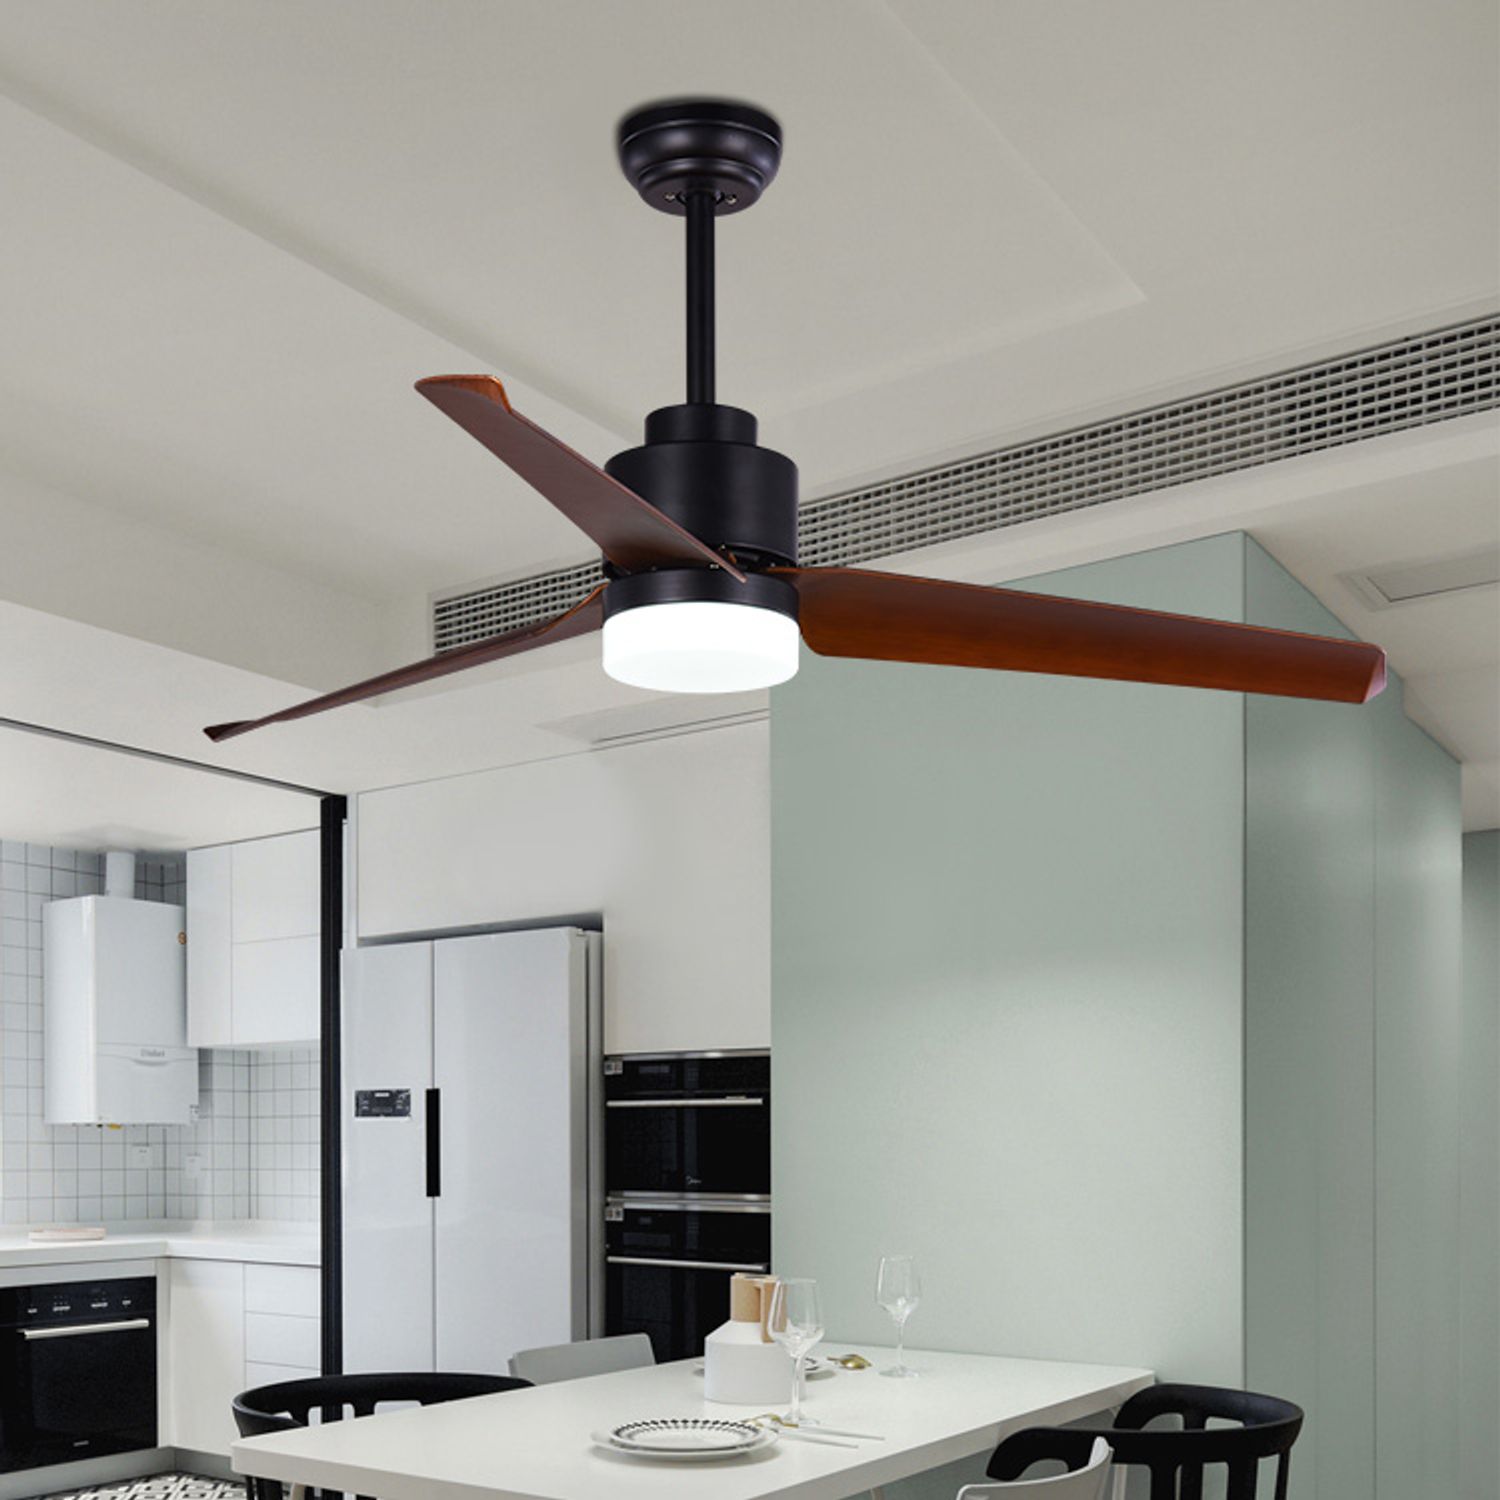 KBS 51 inch ABS Dual Mount Noiseless Ceiling Fan with LED Light in a room